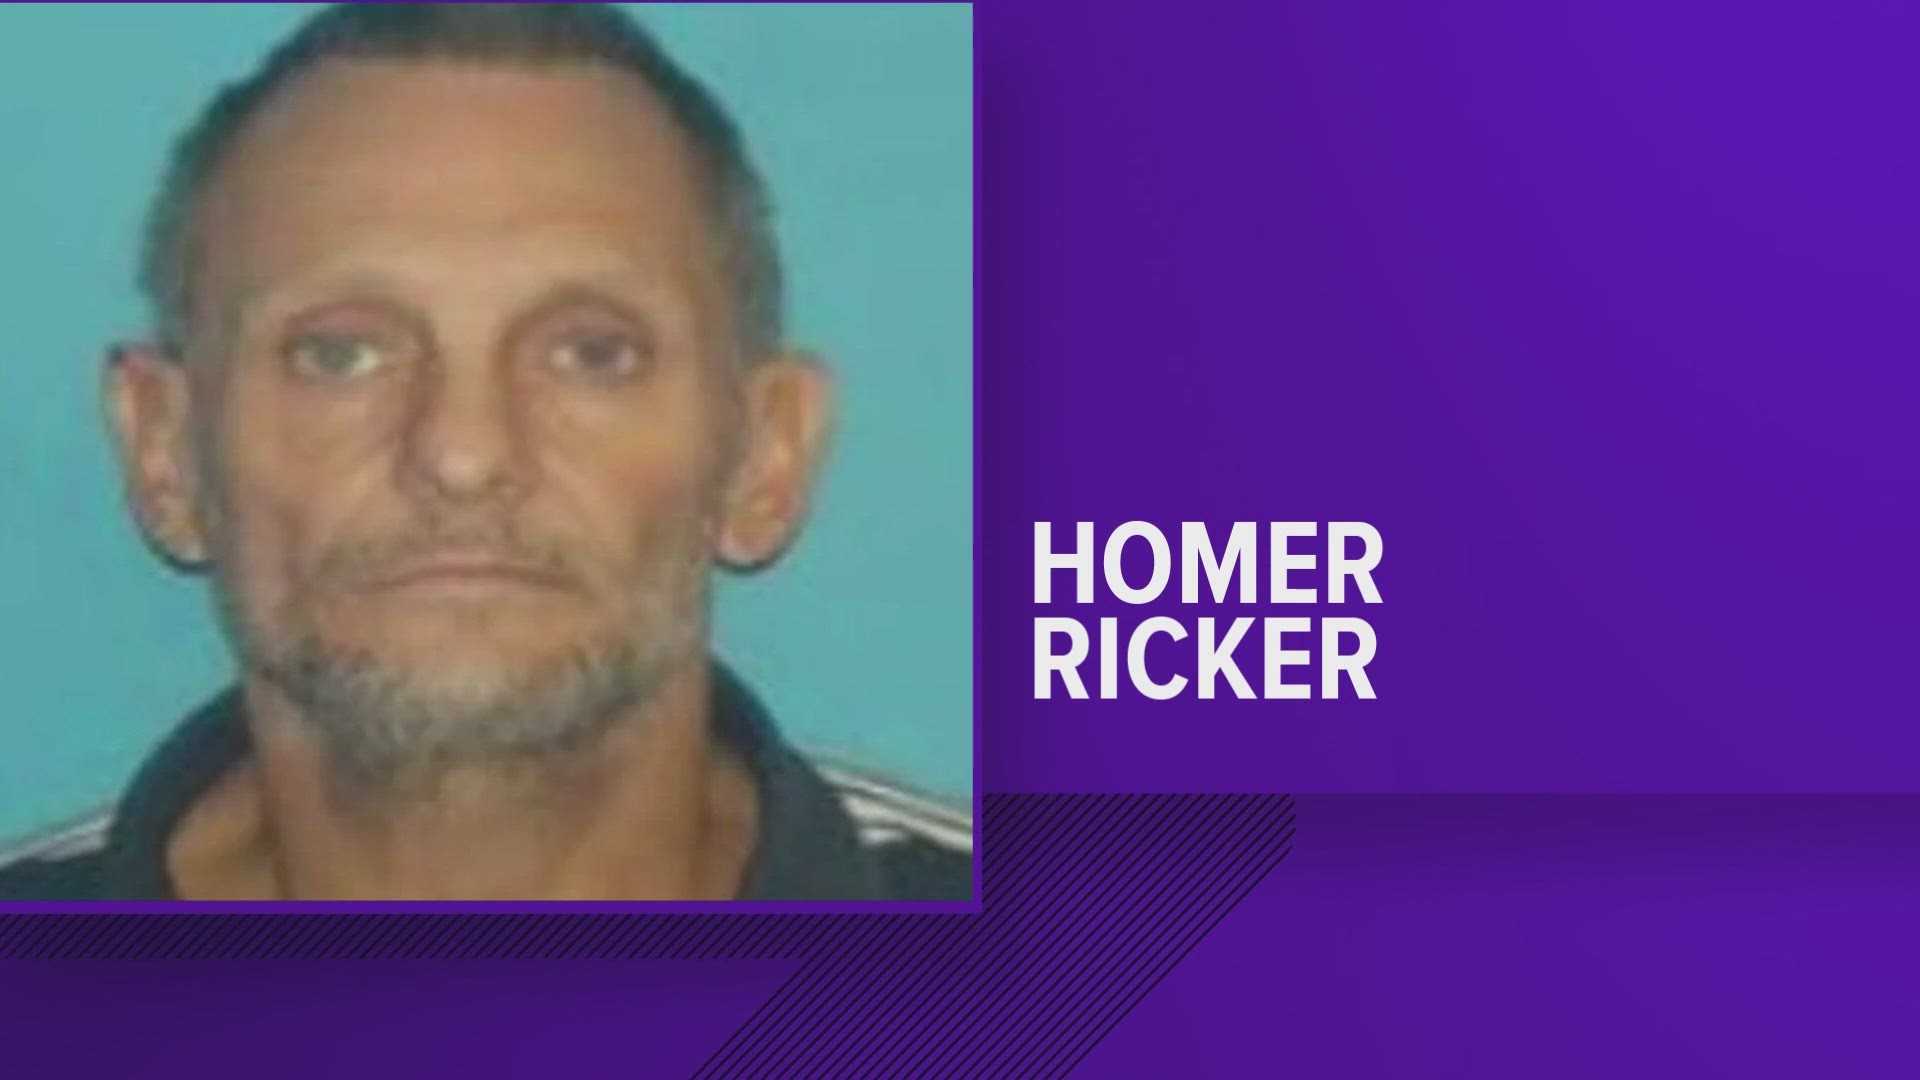 Greene County authorities identified skeletal remains found in the area as belonging to a man who was reported missing in 2019.